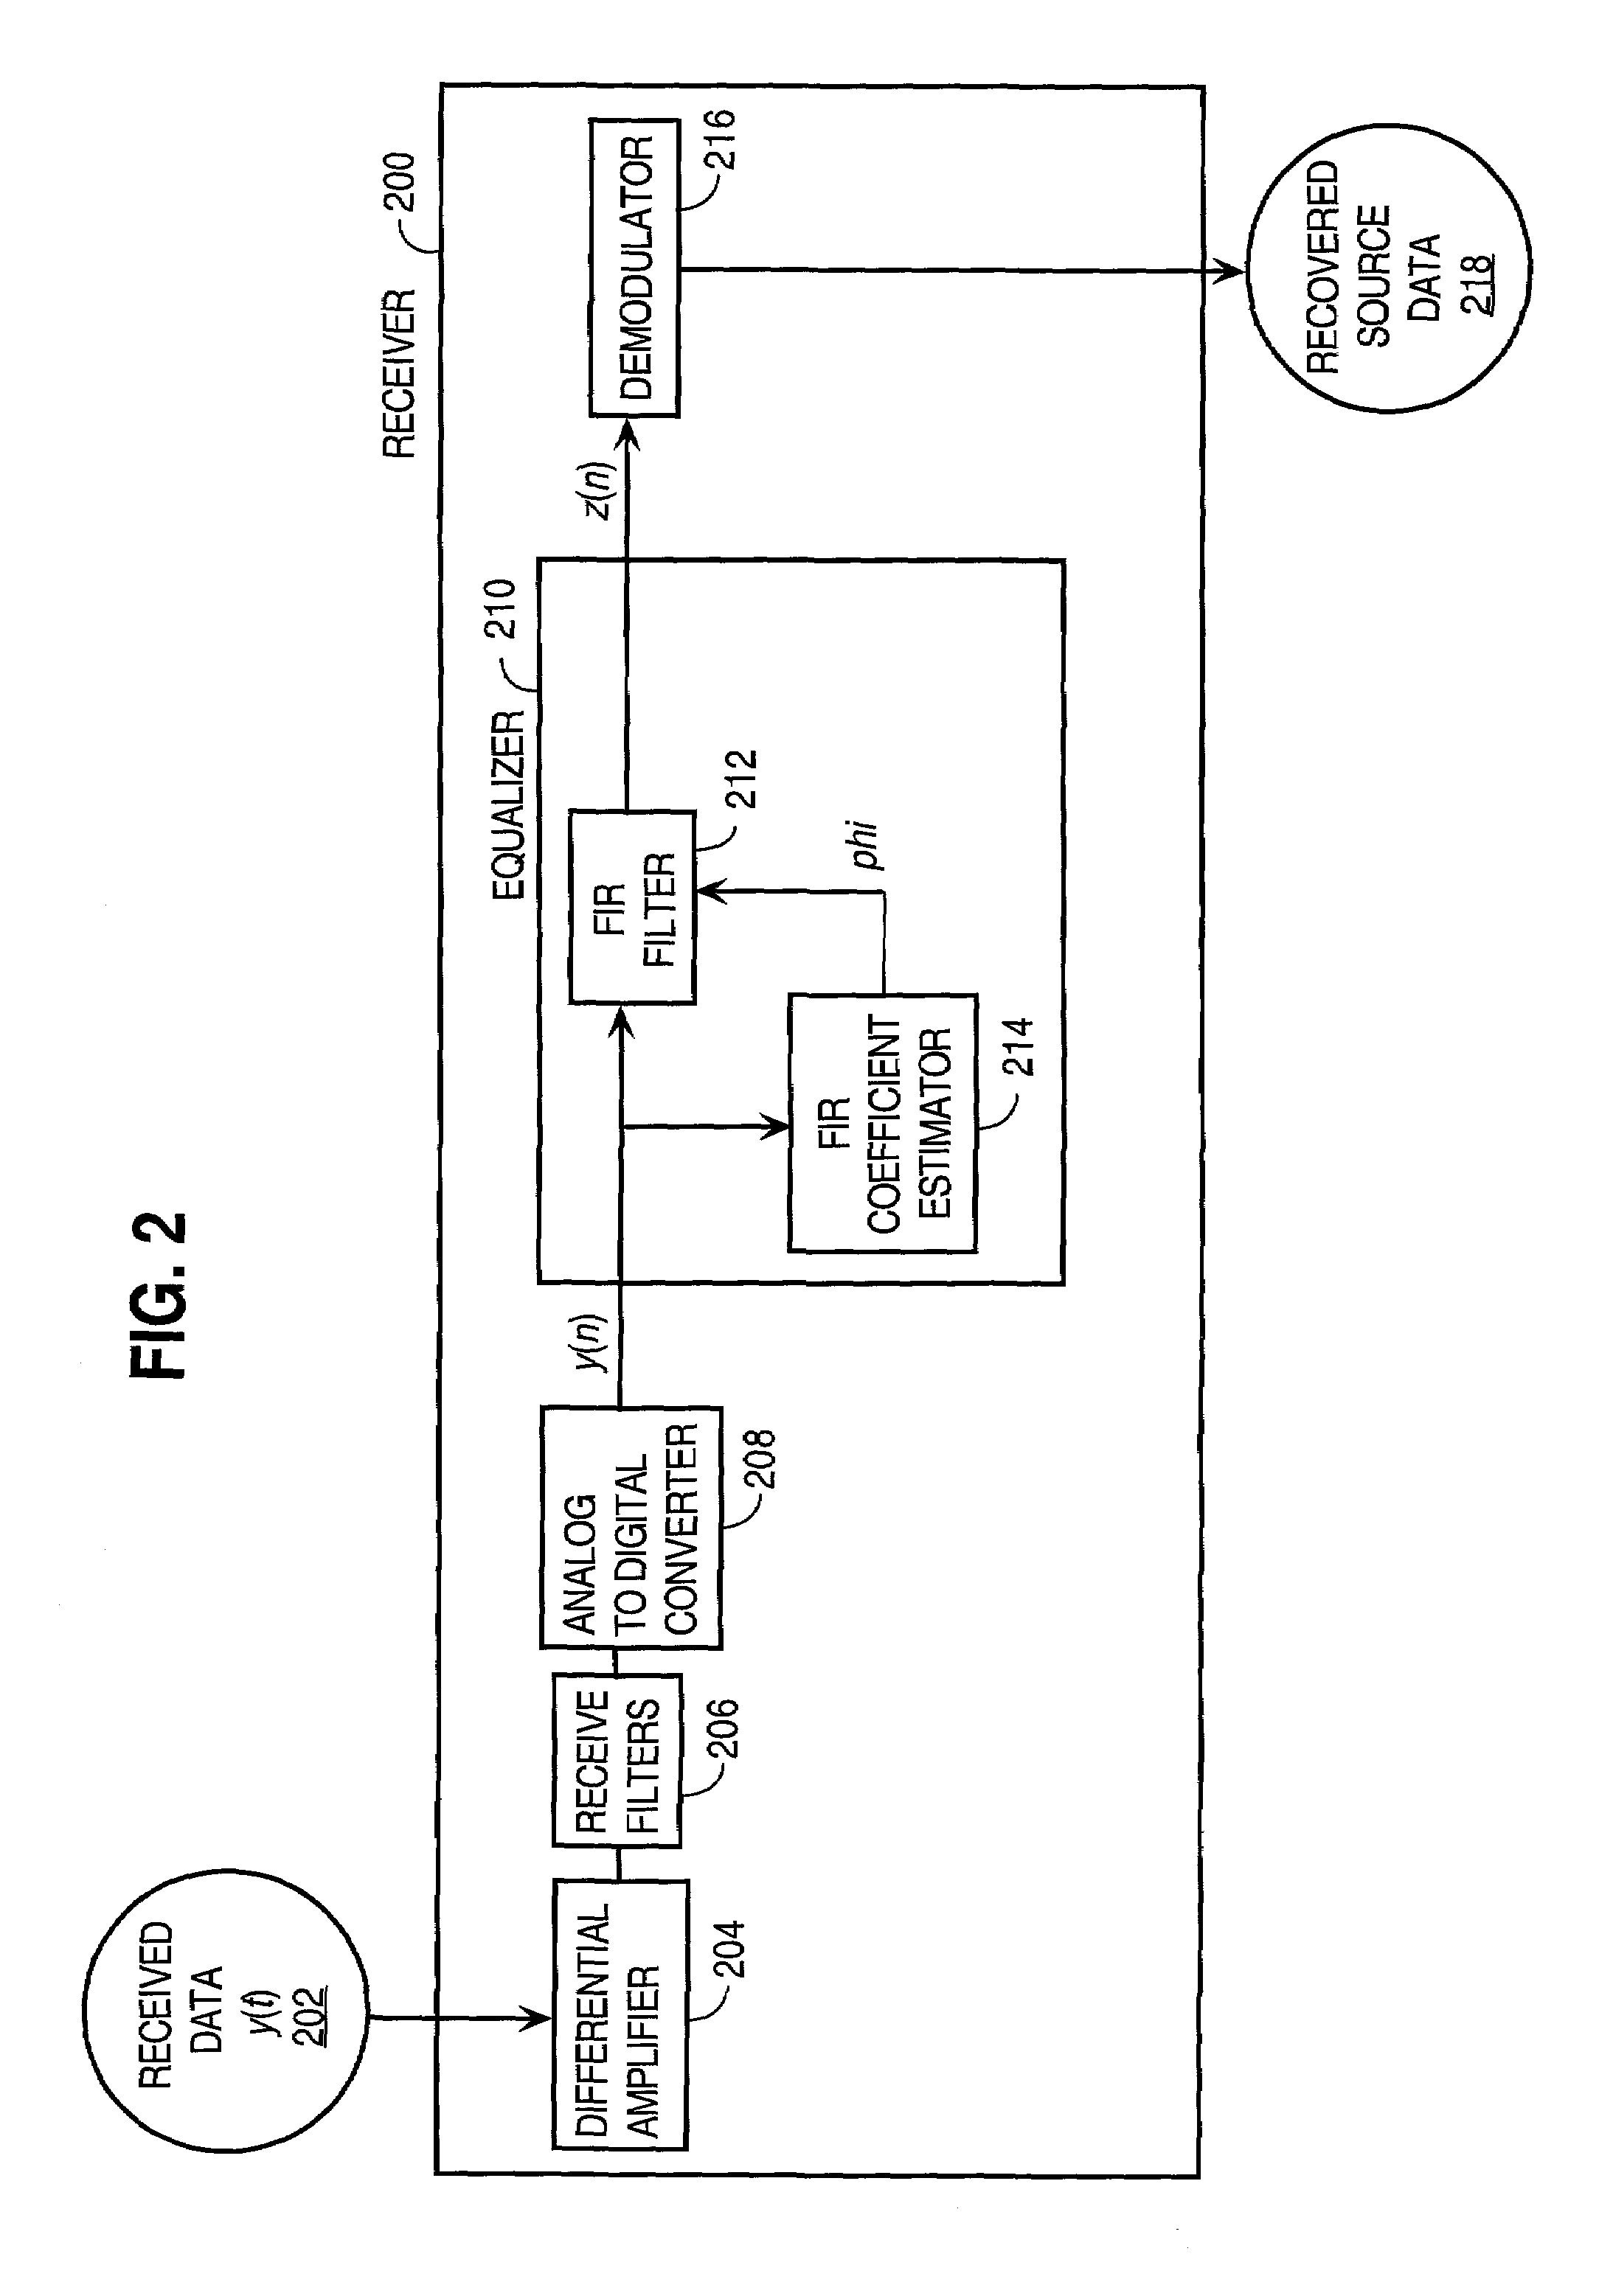 Approach for processing data received from a communications channel to reduce noise power and optimize impulse response length to reduce inter-symbol interference and inter-channel interference